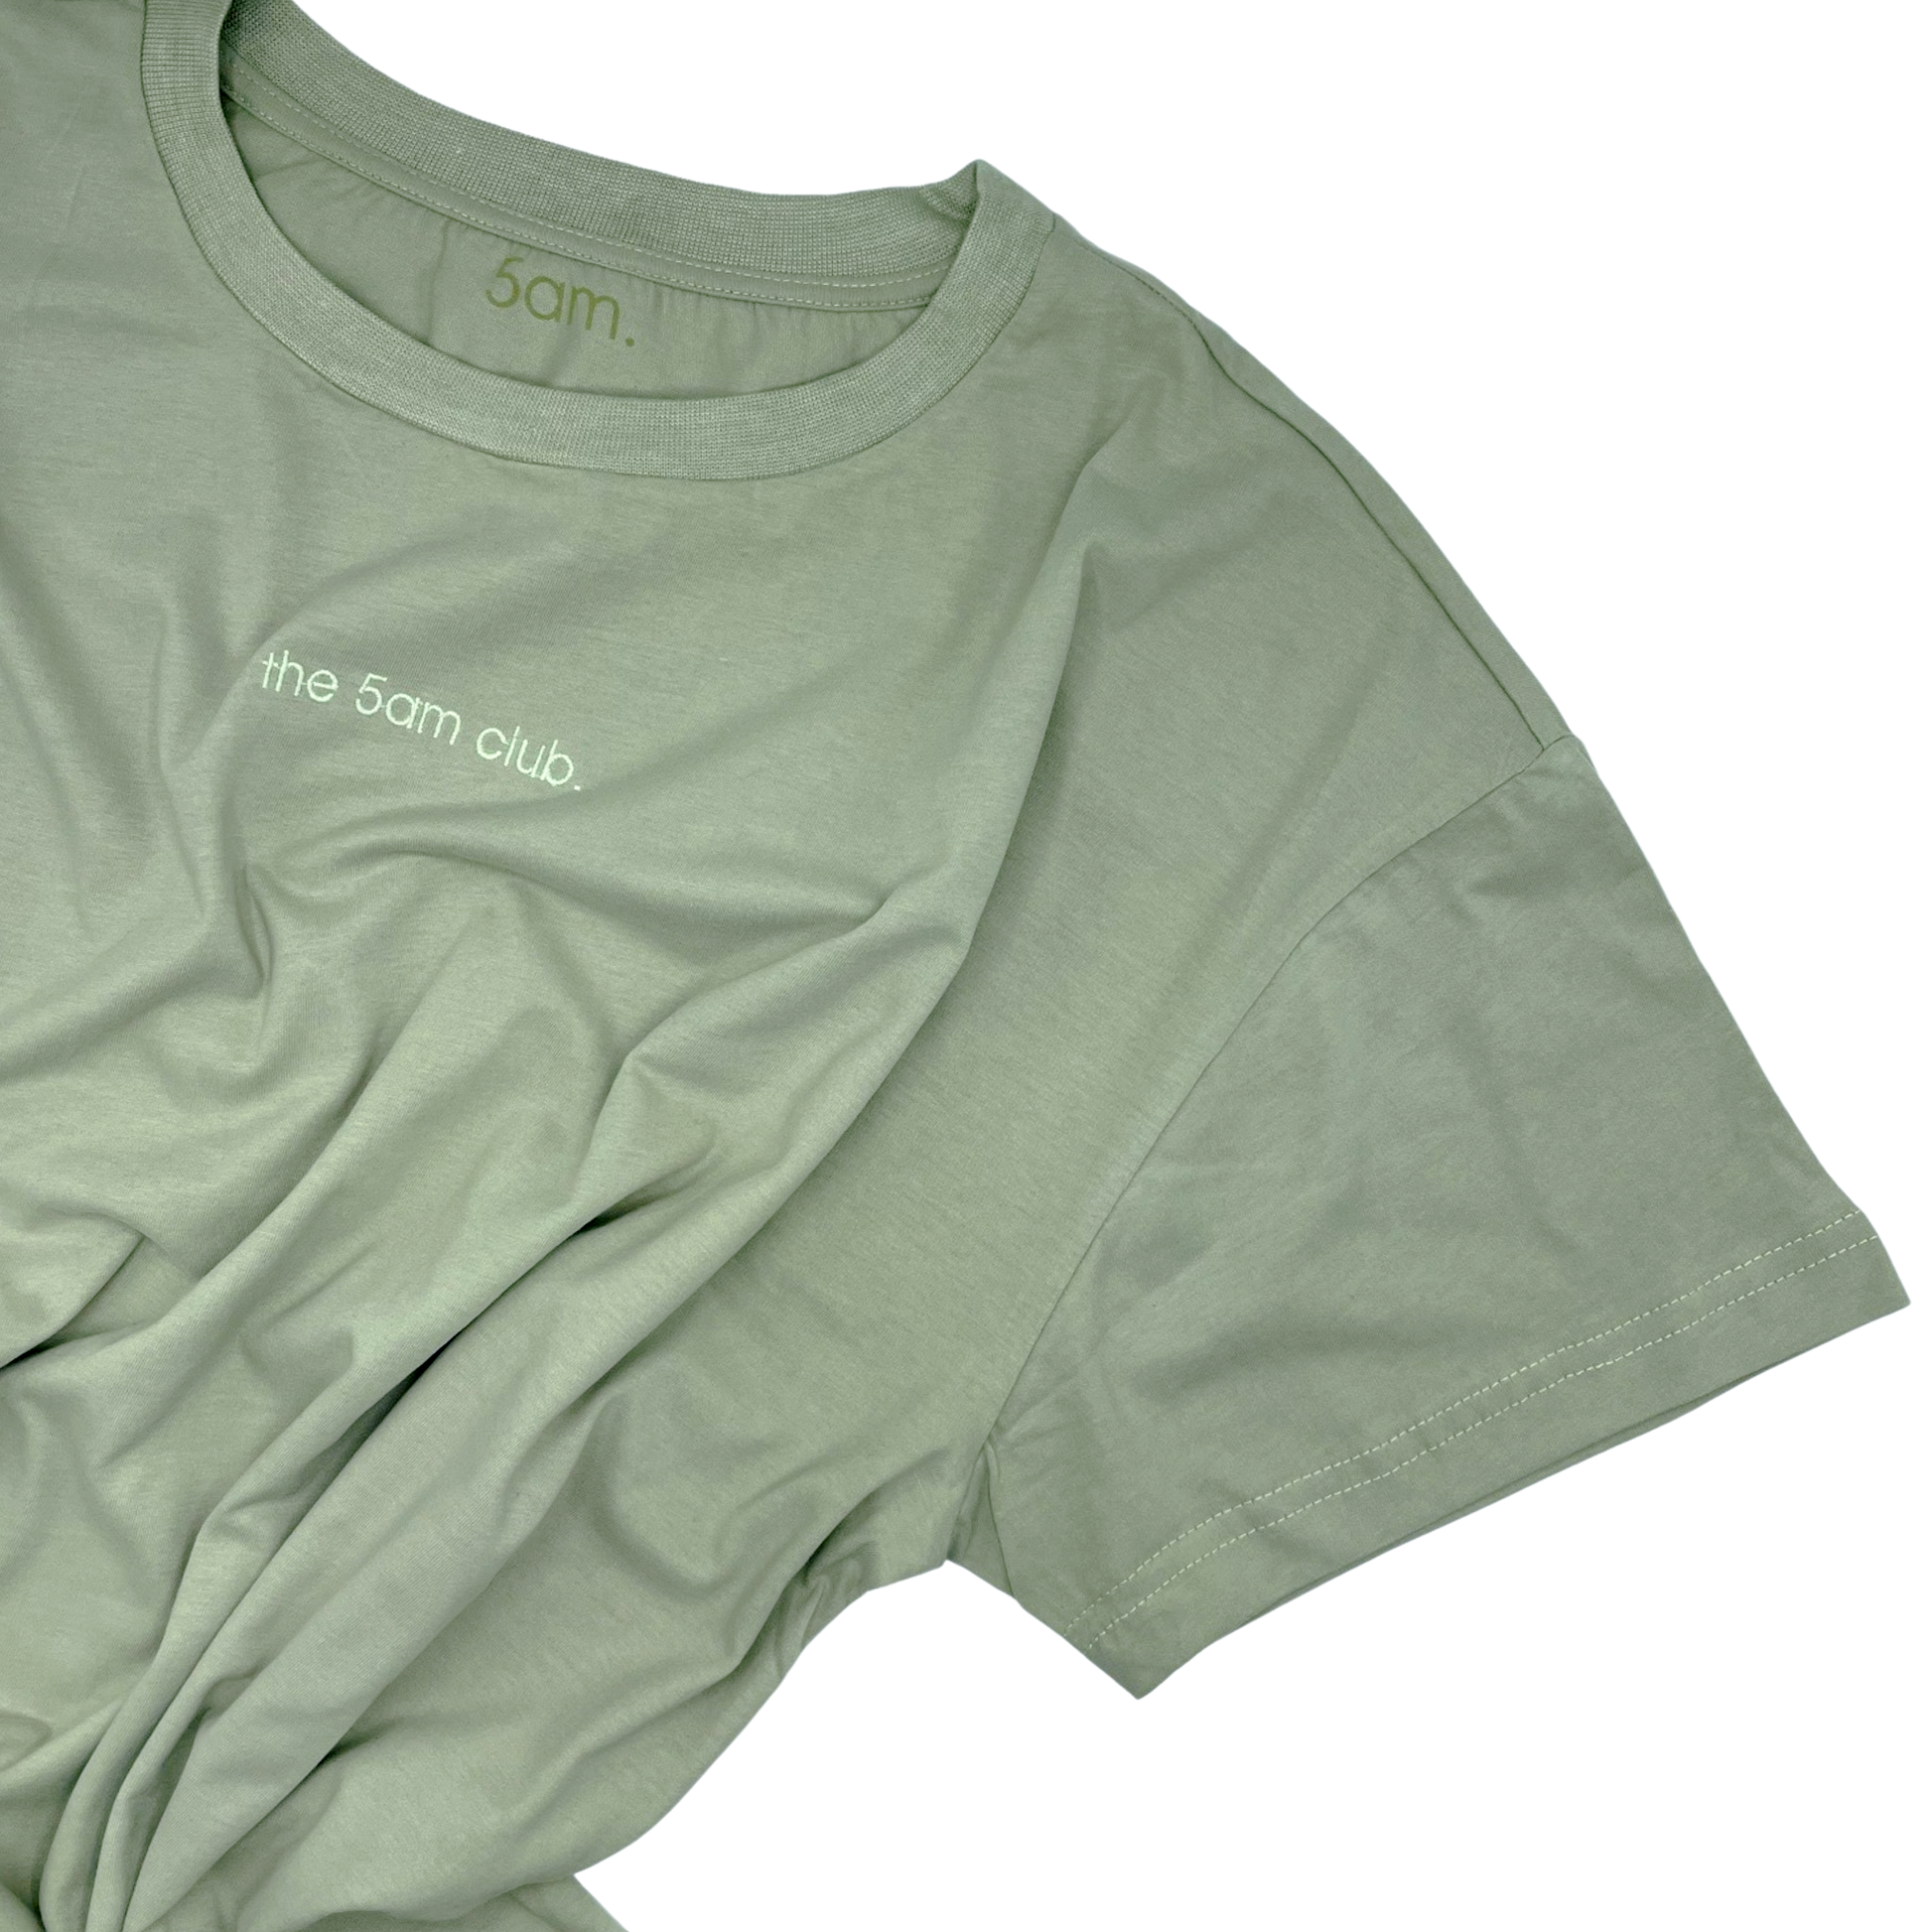 sage green womens t-shirt with the 5am club logo on the chest